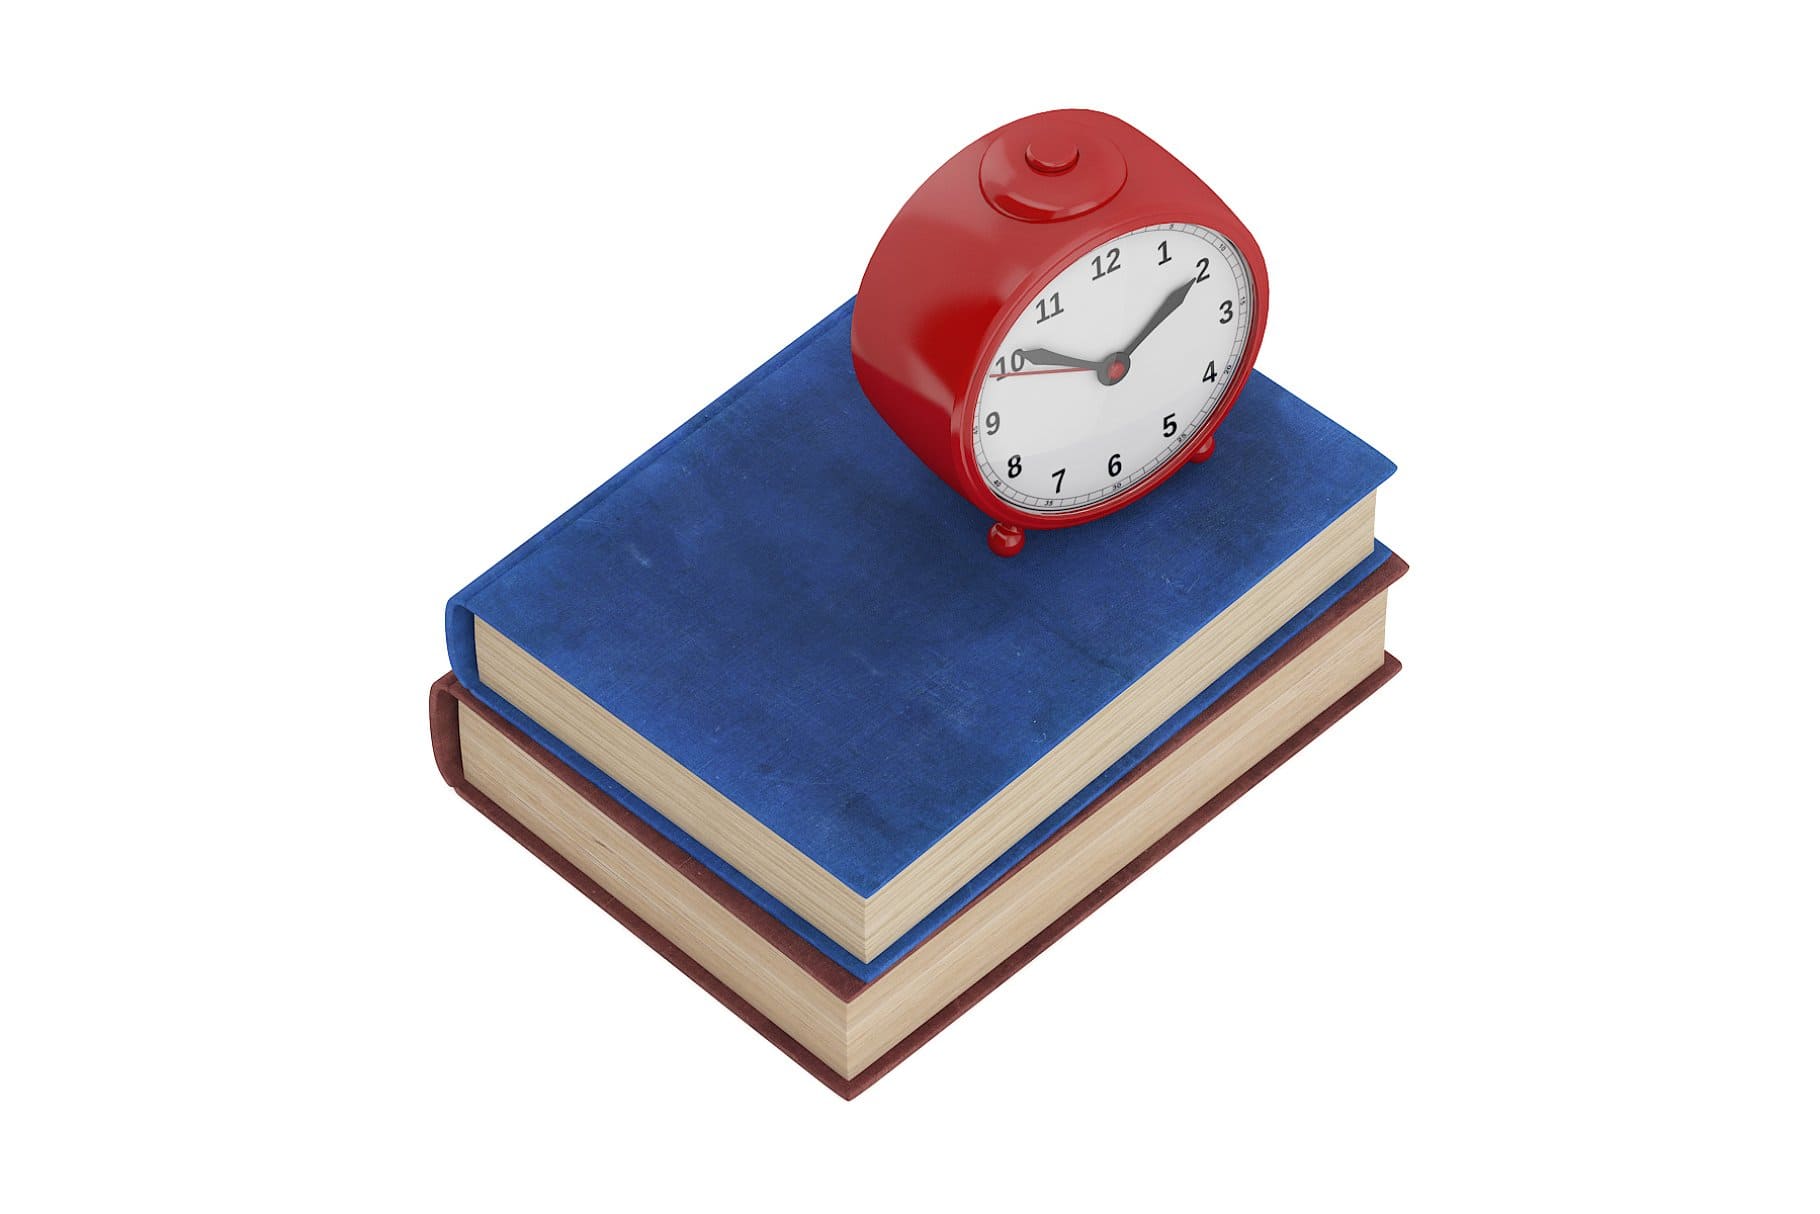 Two large books and a red table clock.